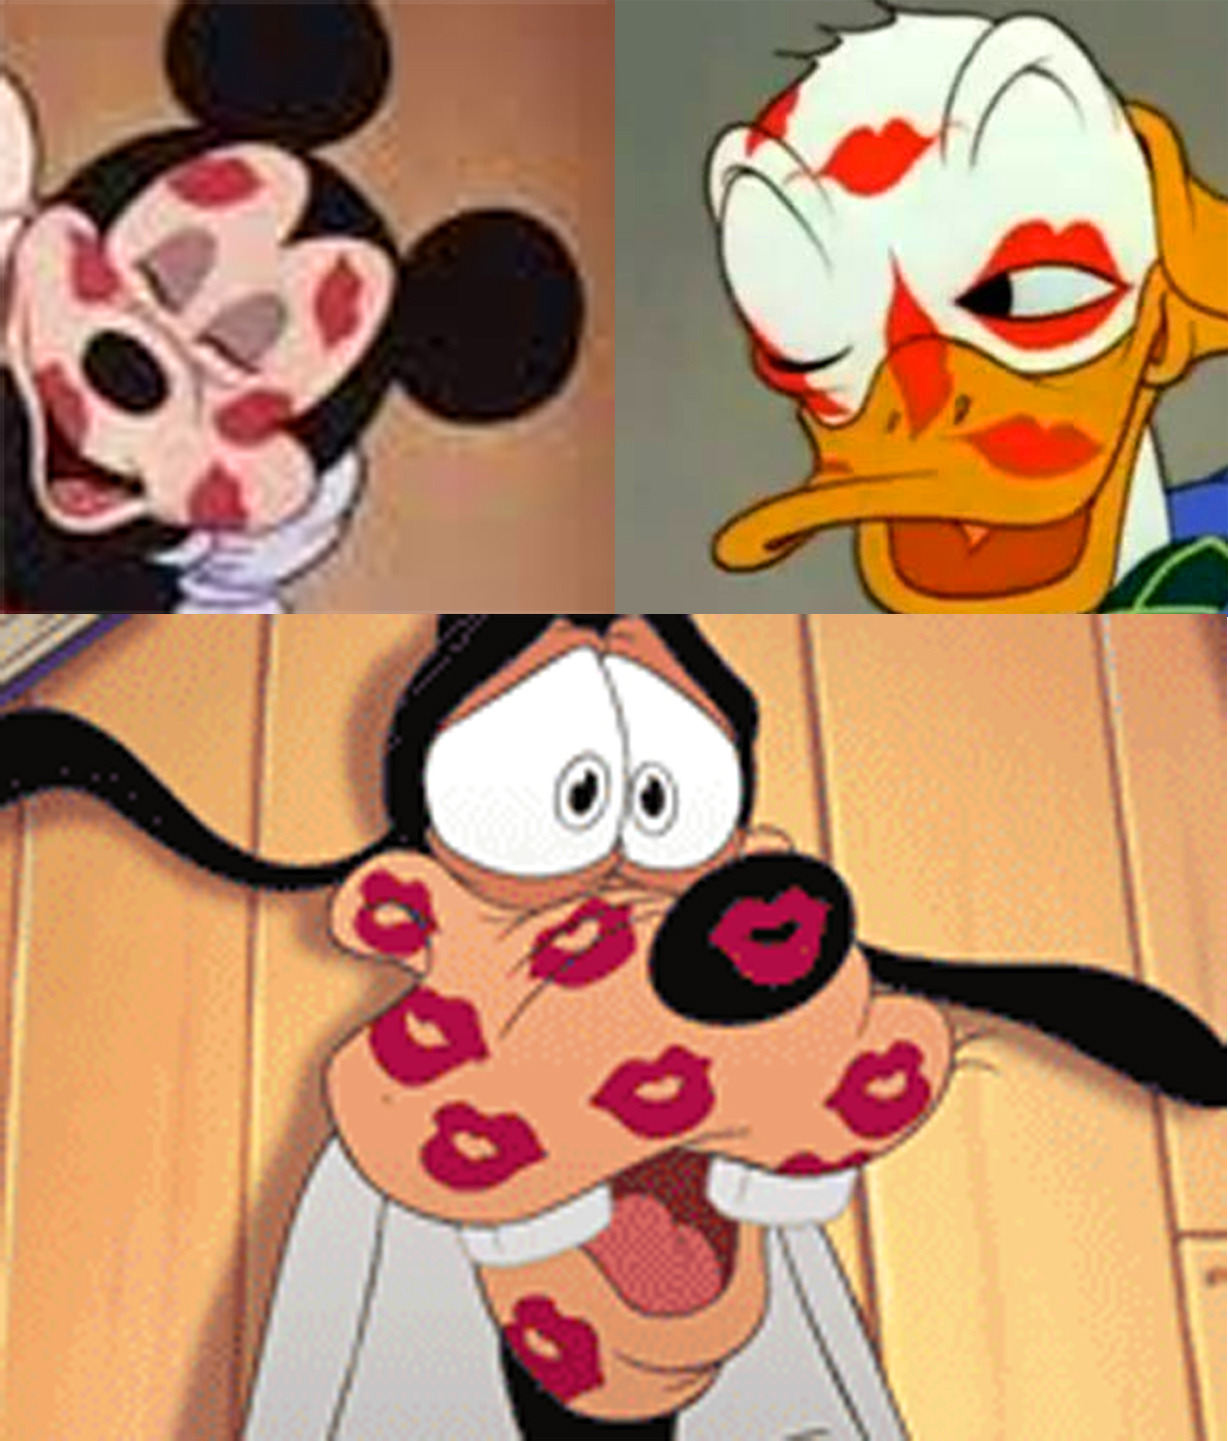 RoseMary1315 — The Classic Disney Trio with Lipstick Kiss Marks...